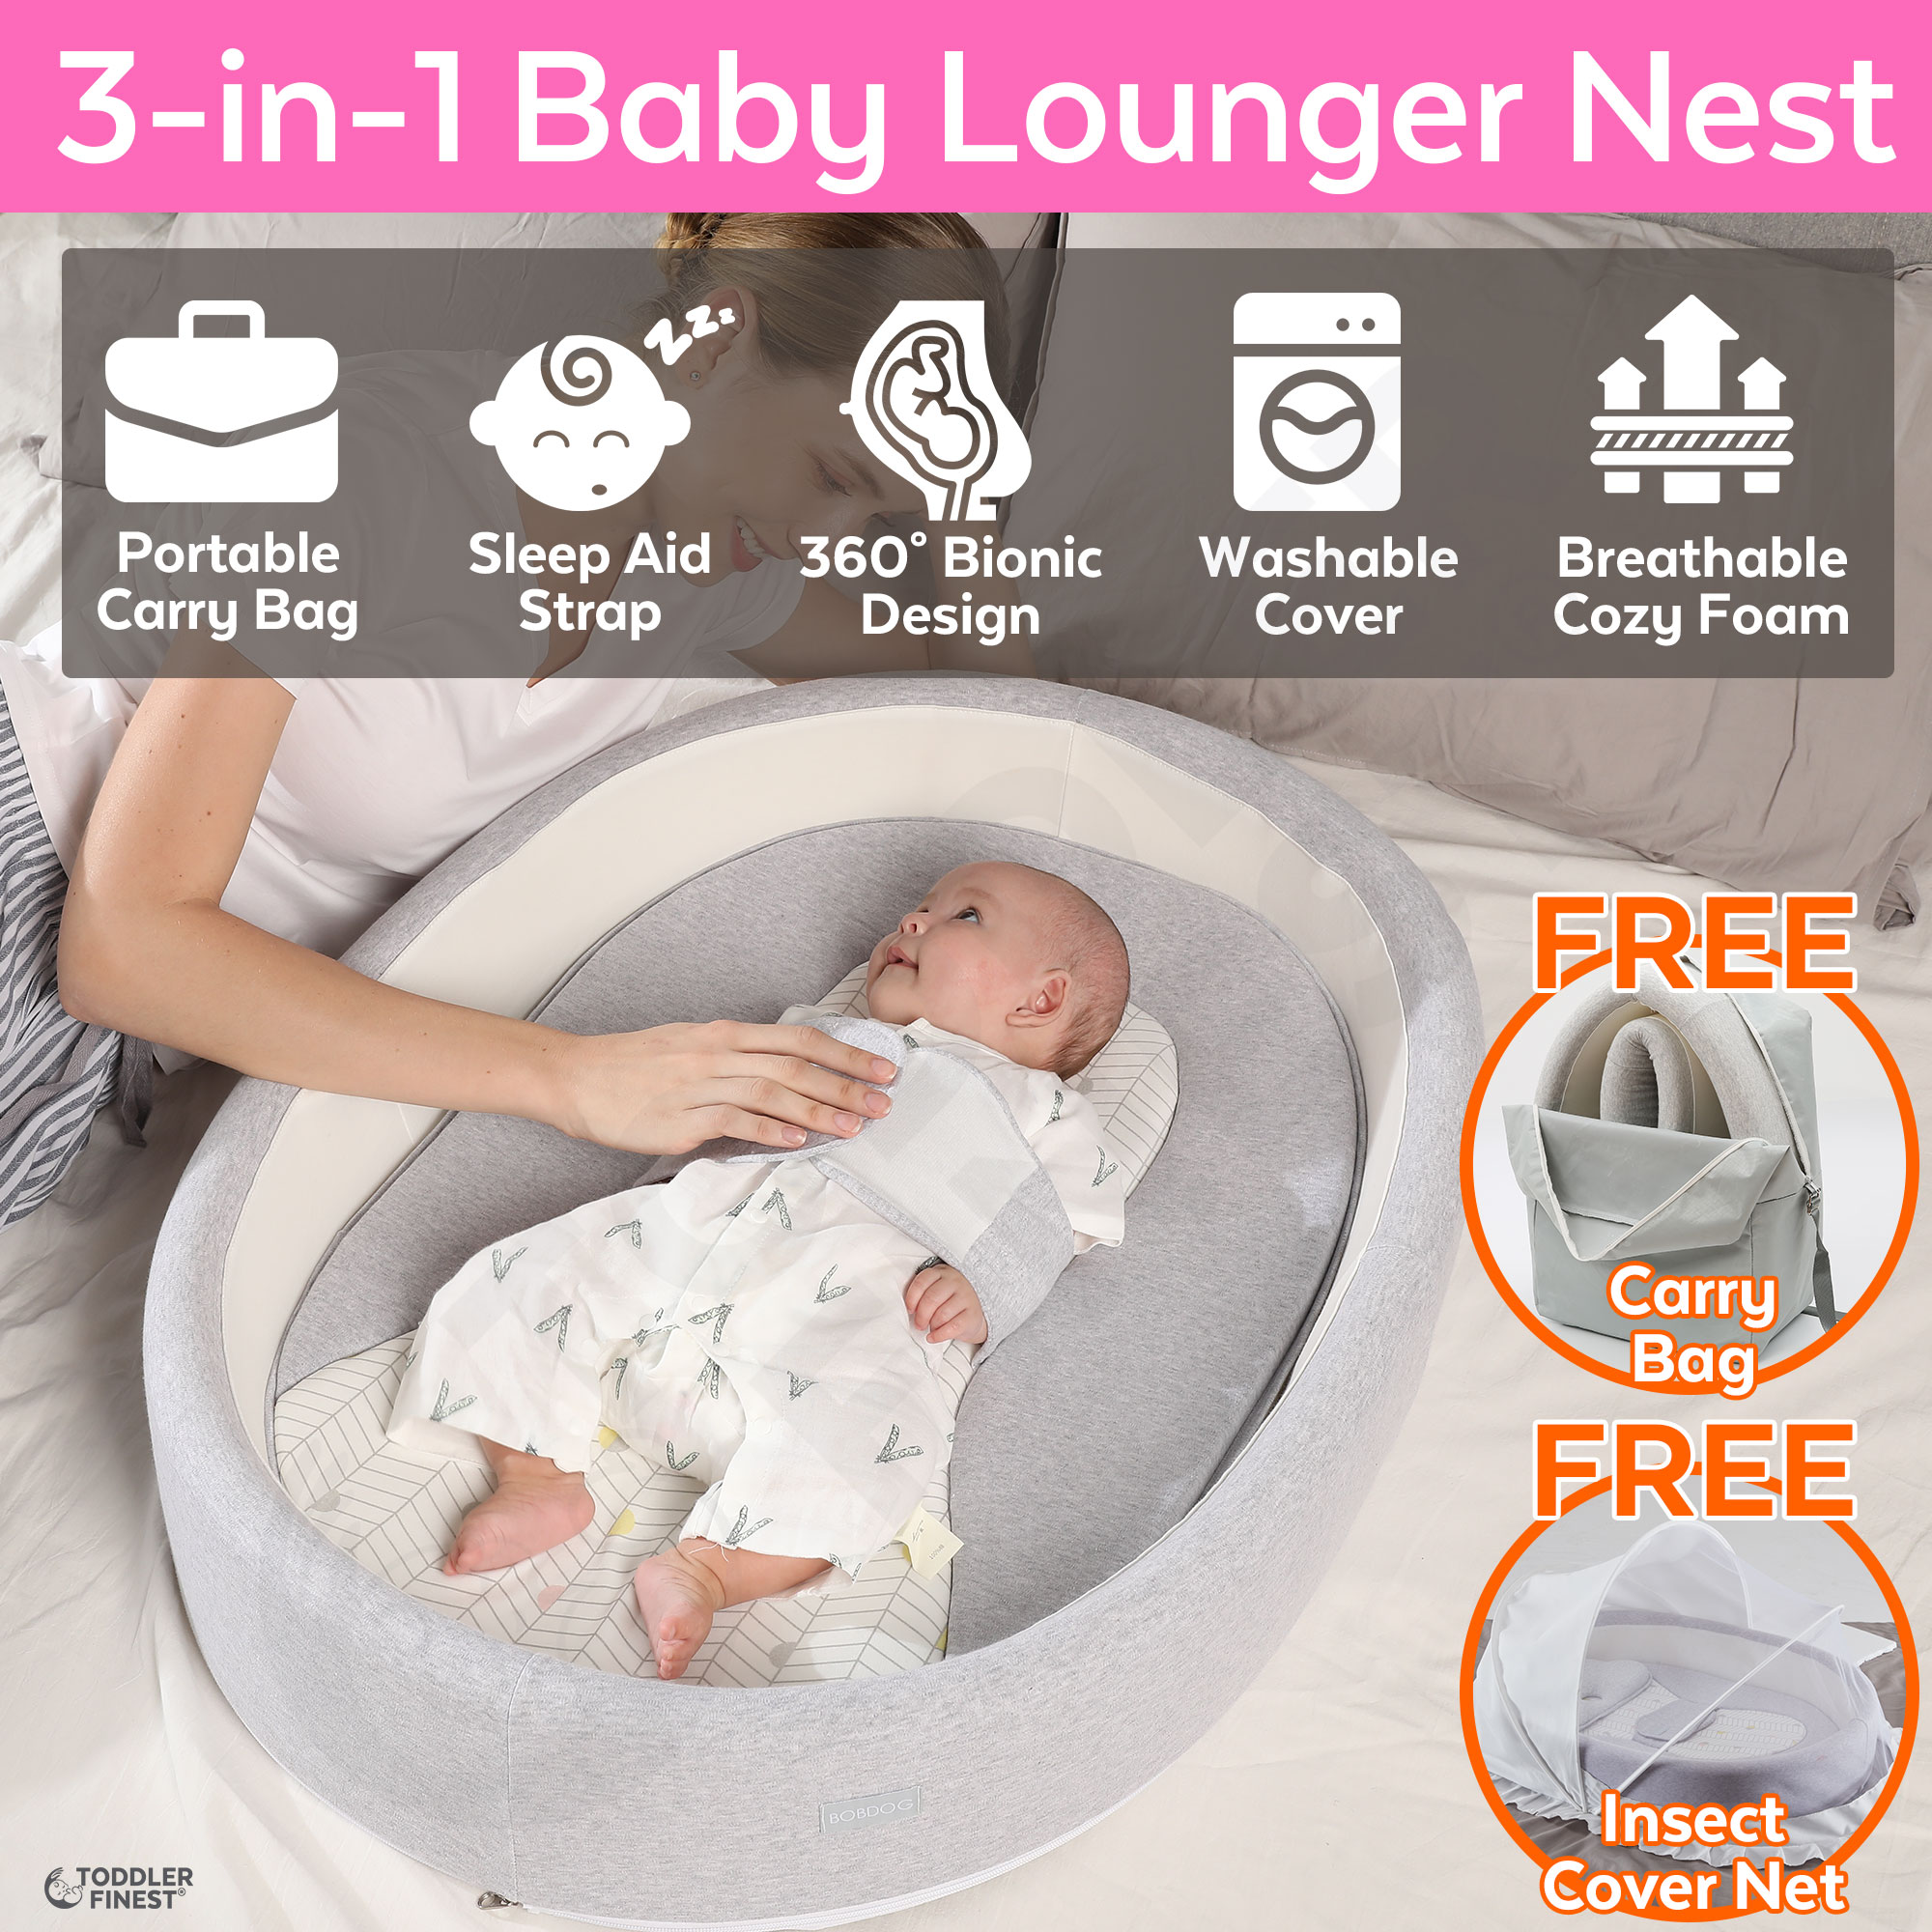 MisDress Baby Newborn and Infant Lounger Nest for Cosleeping 100% Cotton Portable Crib for Newborn 0-24Months Portable Bassinet Breathable & Hypoallergenic 